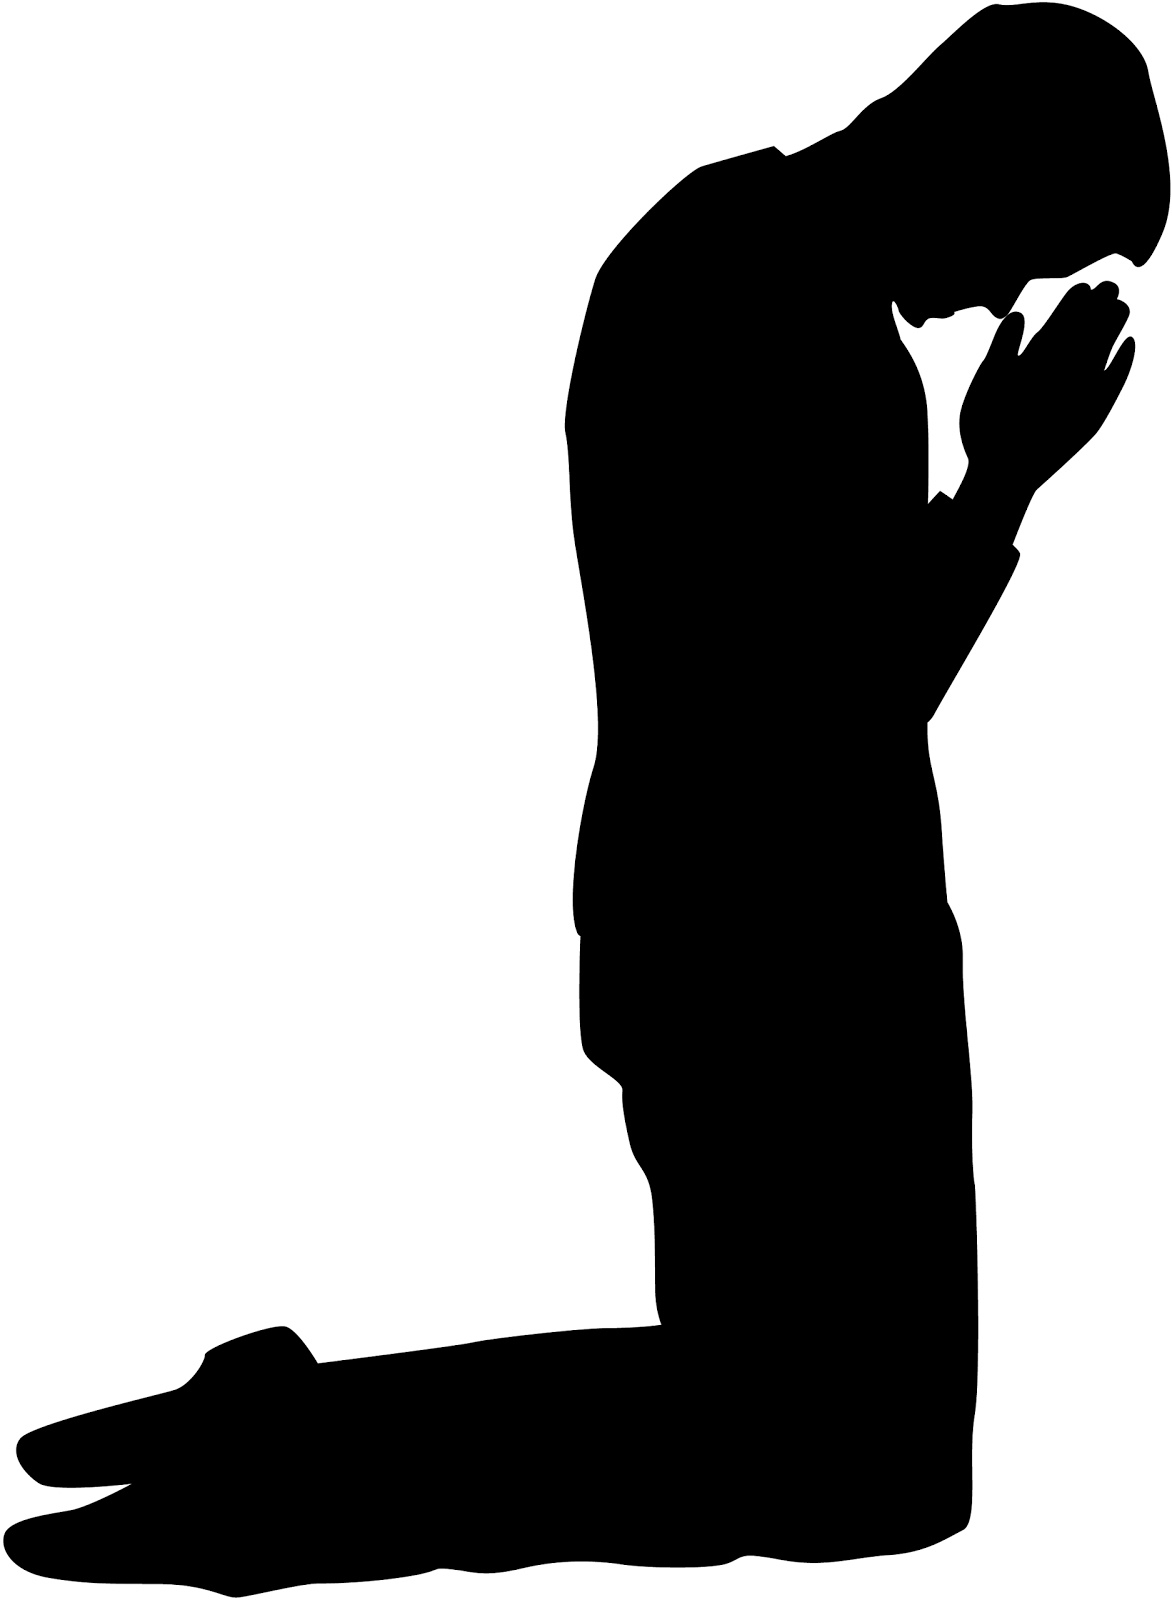 1000+ images about Kneel in prayer